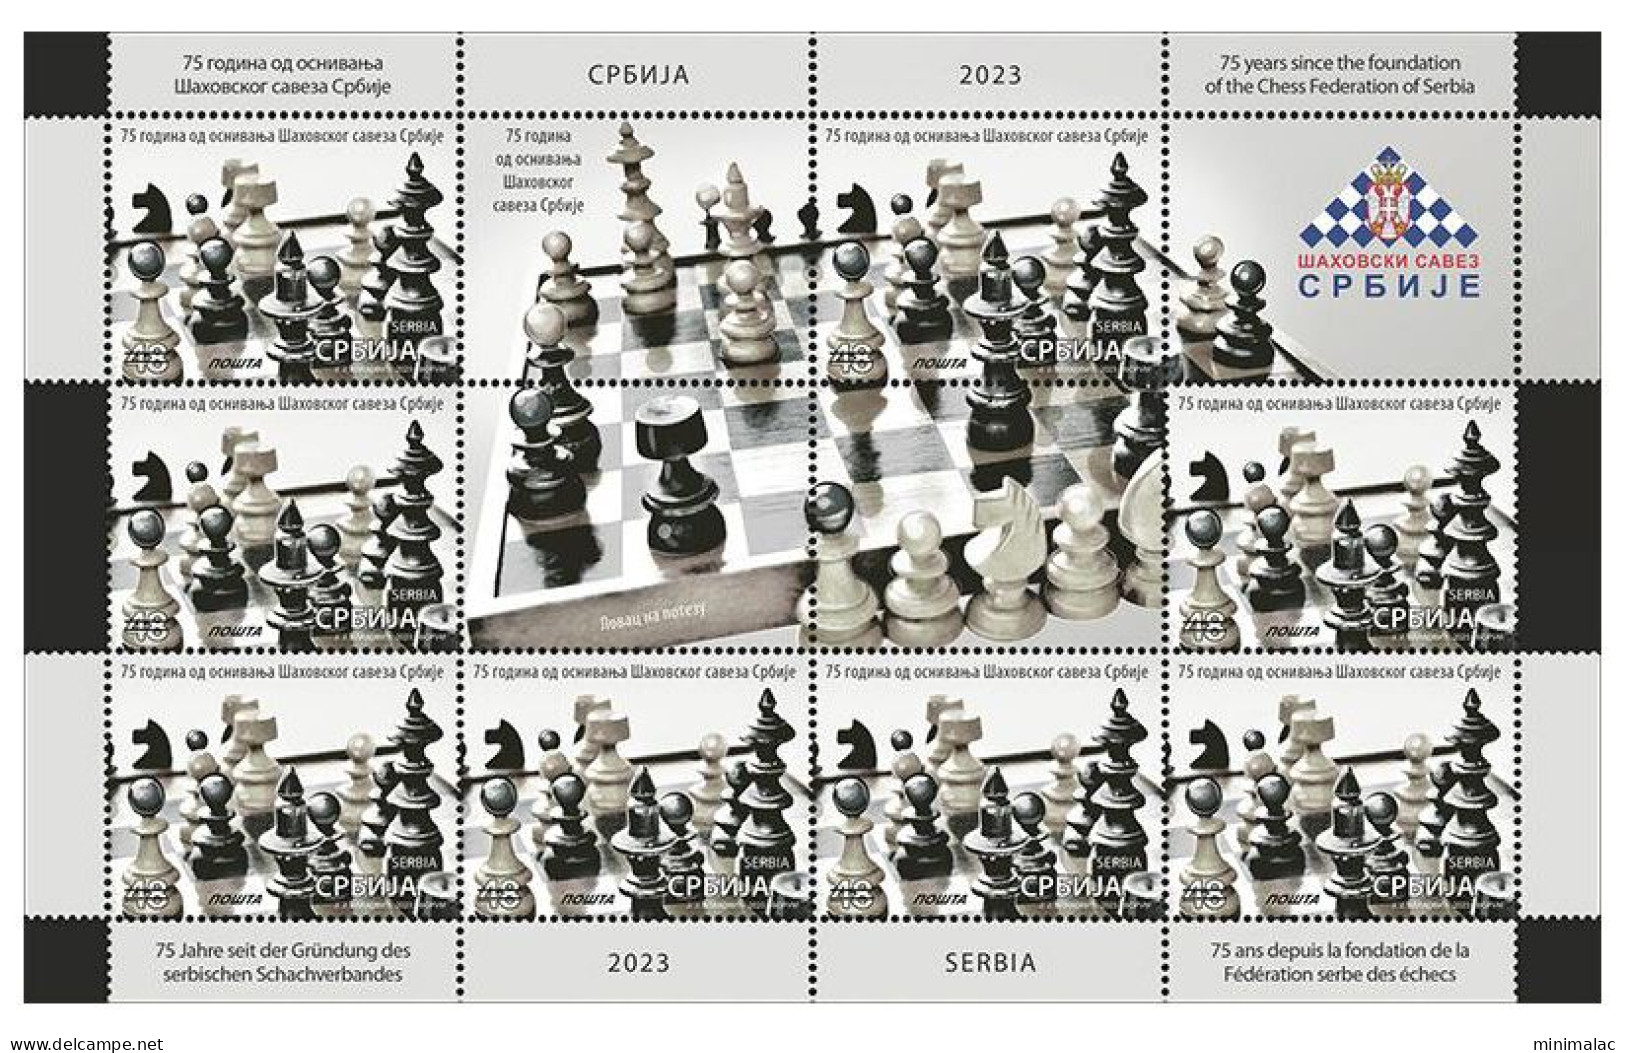 Serbia 2023. 75 Years Since The Foundation Of The Chess Federation Of Serbia, Mini Sheet, MNH - Serbia